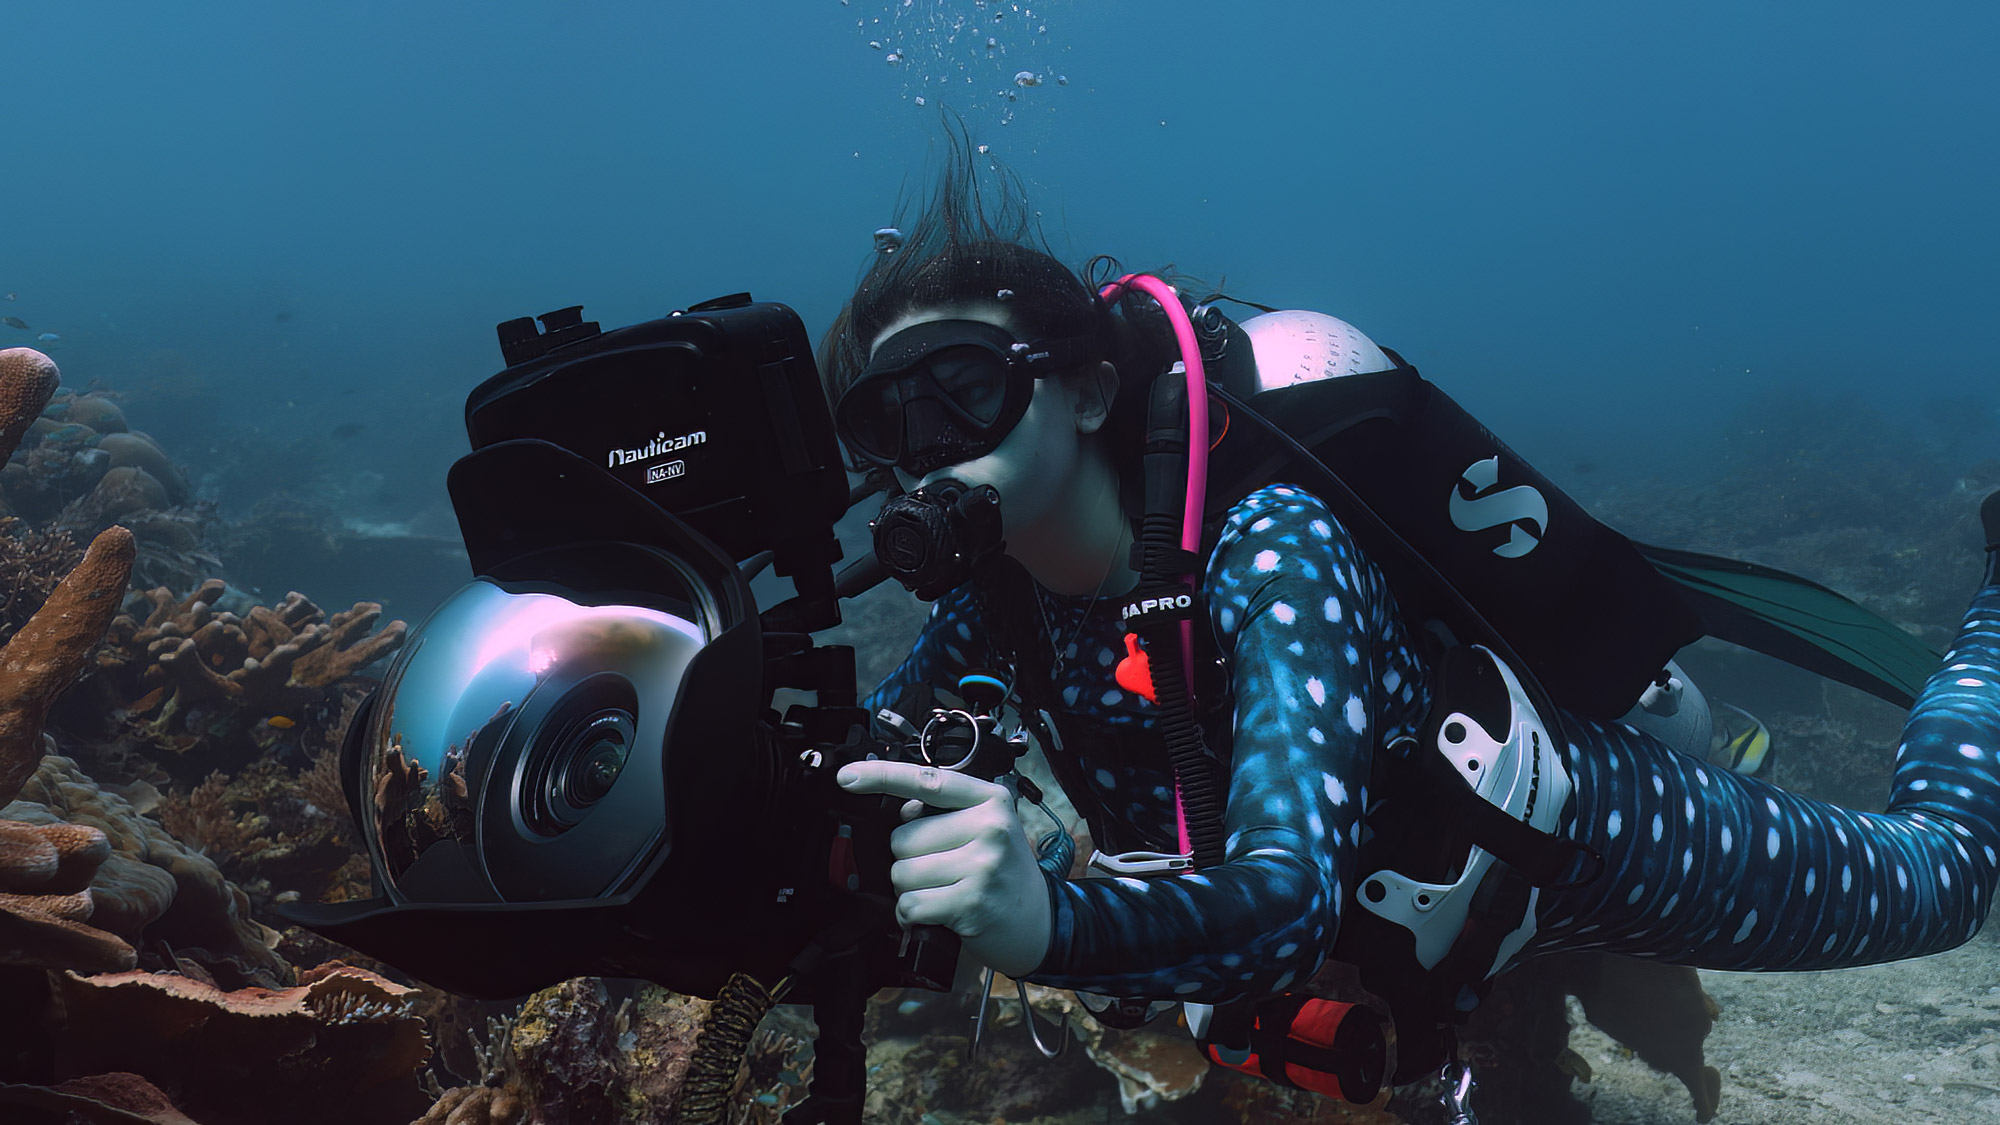 Nauticam Underwater Housing for Sony A7SIII Camera – Reef Photo & Video